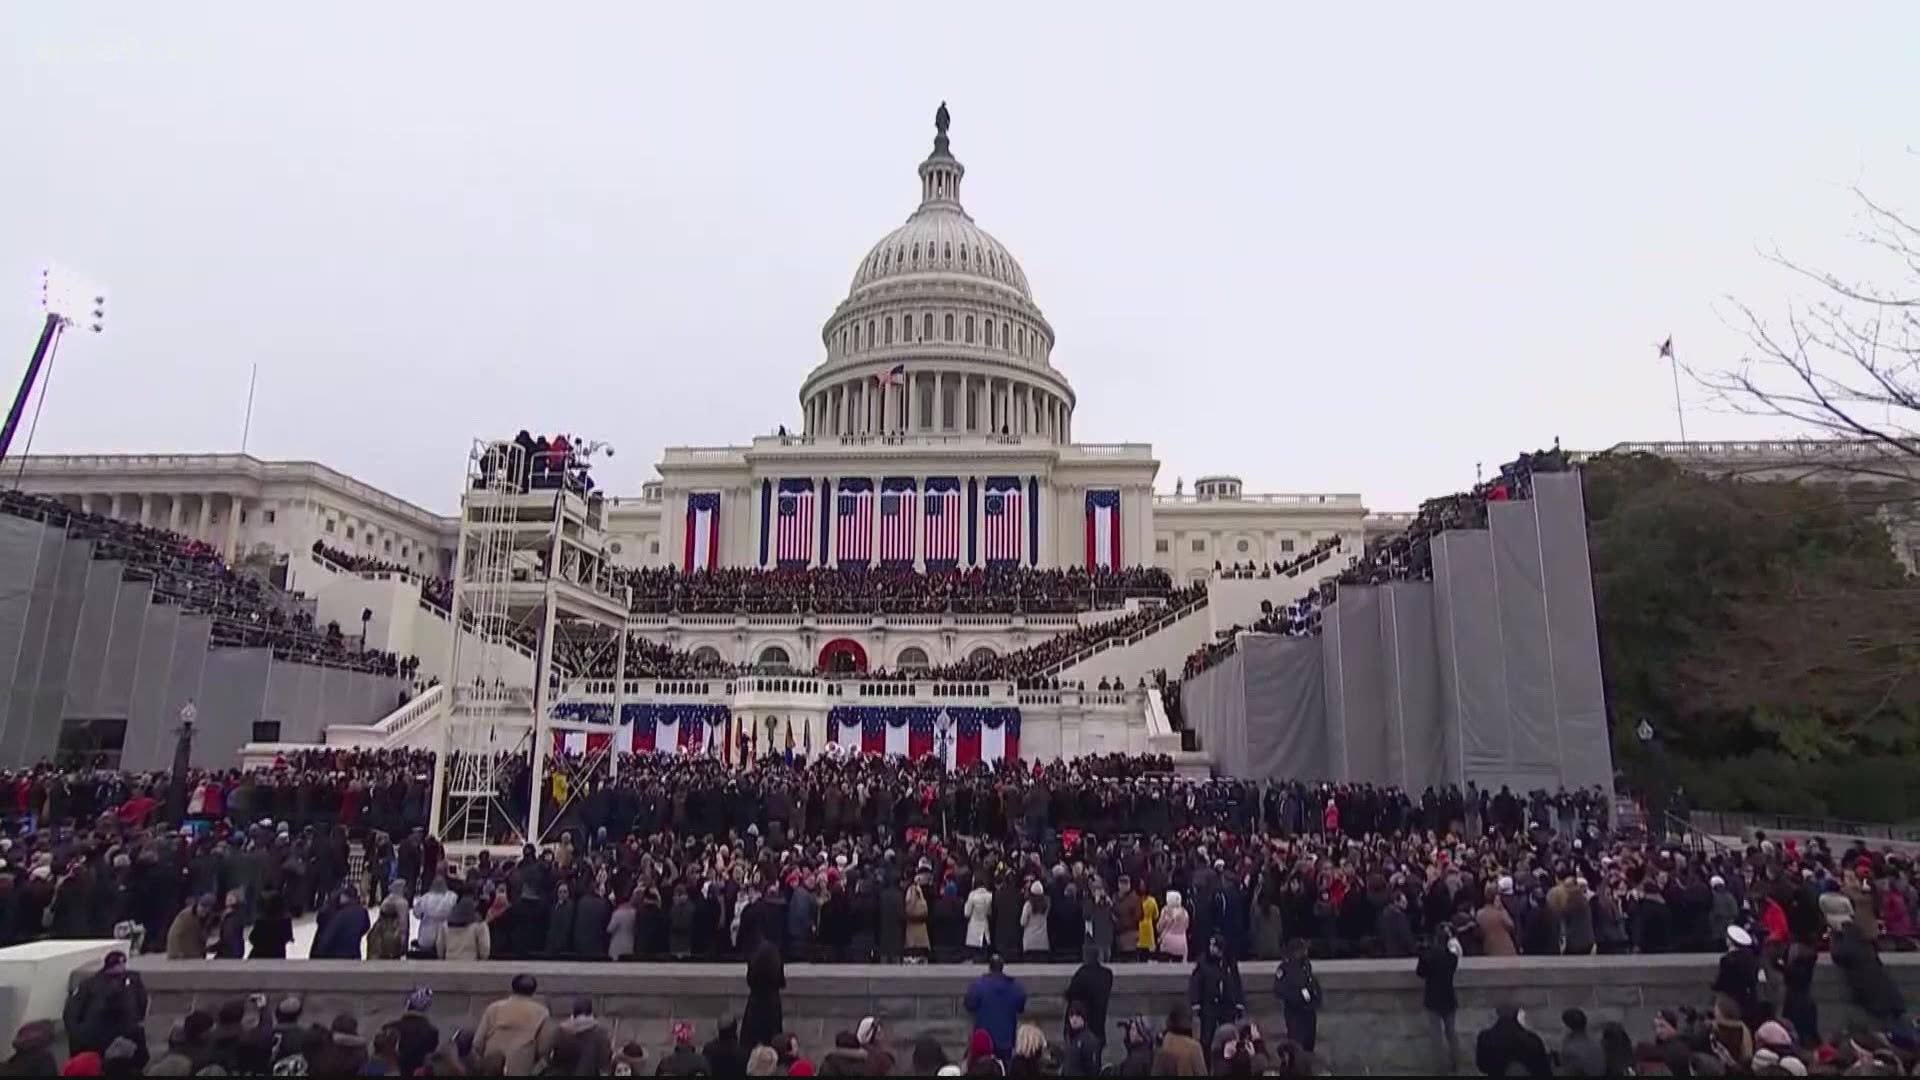 Next week's inauguration comes with added security concerns following Wednesday's insurrection at the Capitol Building.